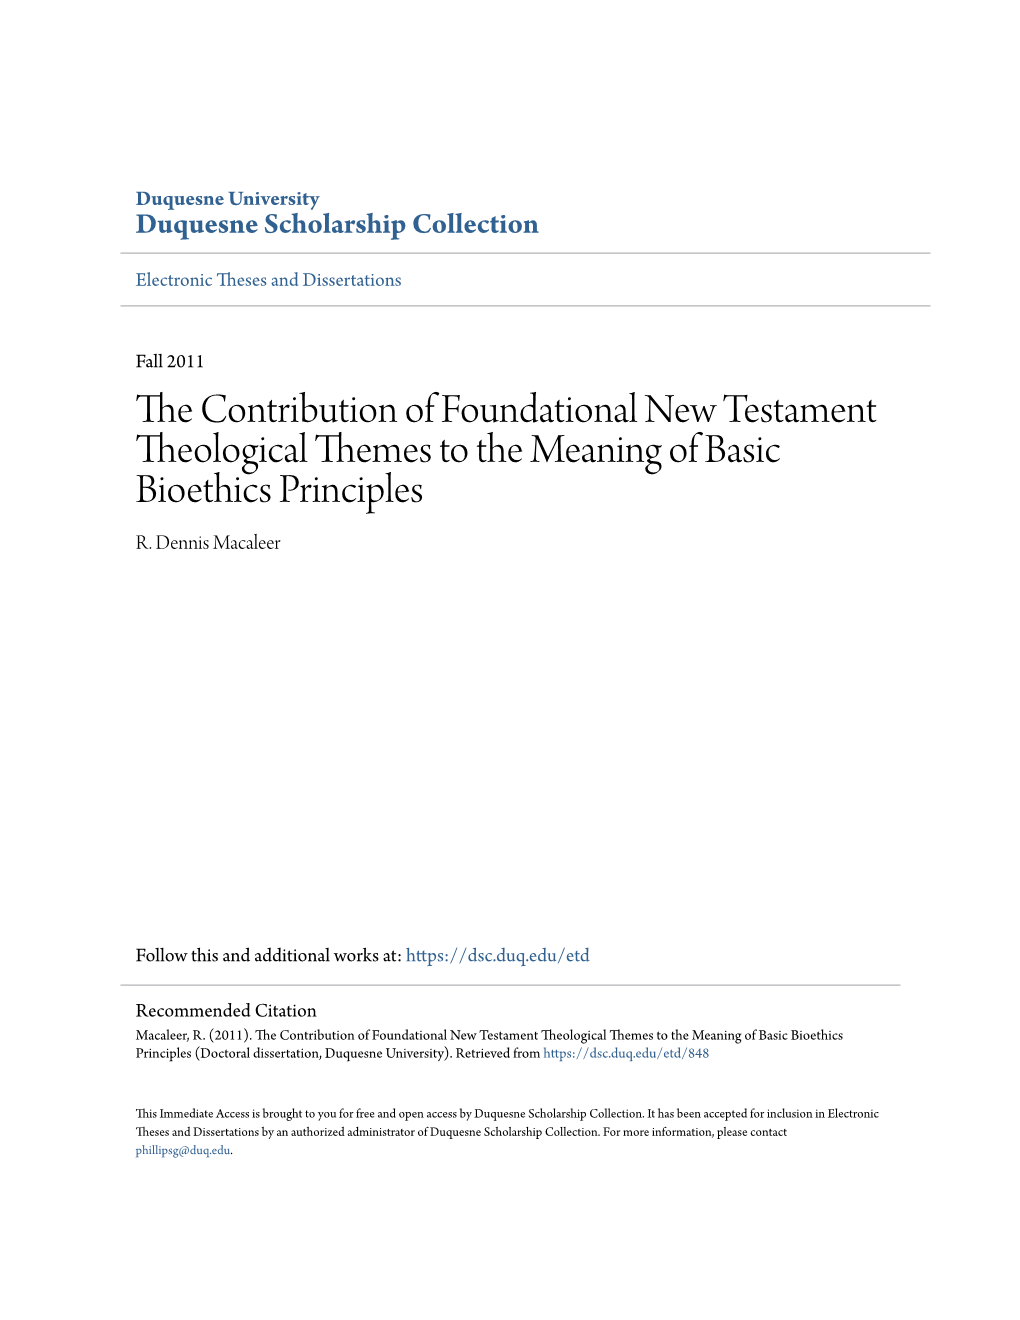 The Contribution of Foundational New Testament Theological Themes to the Meaning of Basic Bioethics Principles